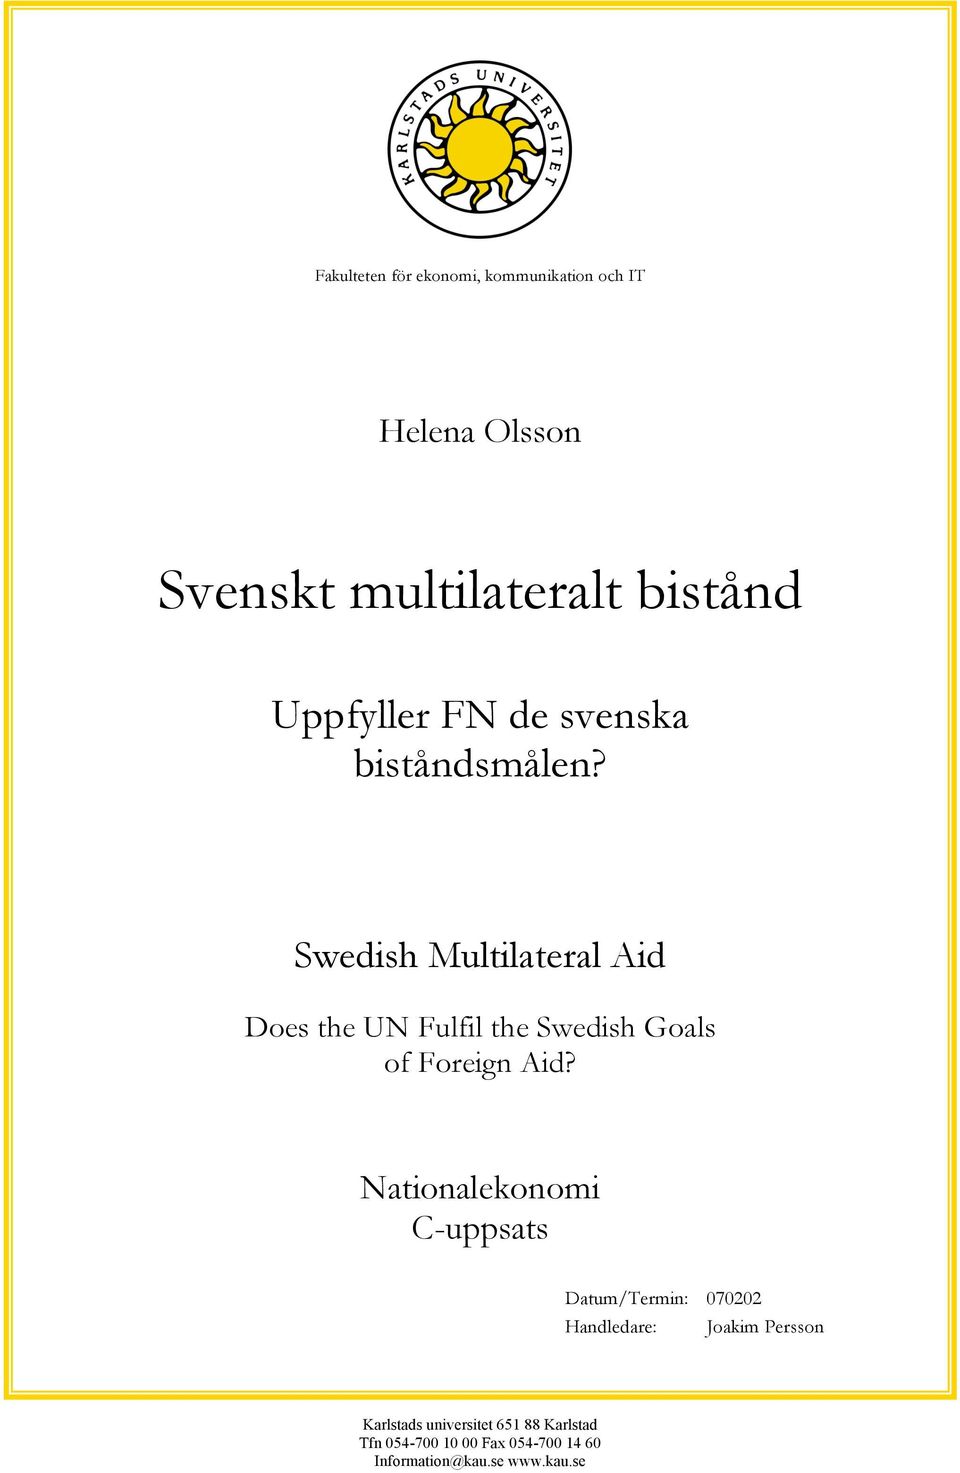 Swedish Multilateral Aid Does the UN Fulfil the Swedish Goals of Foreign Aid?